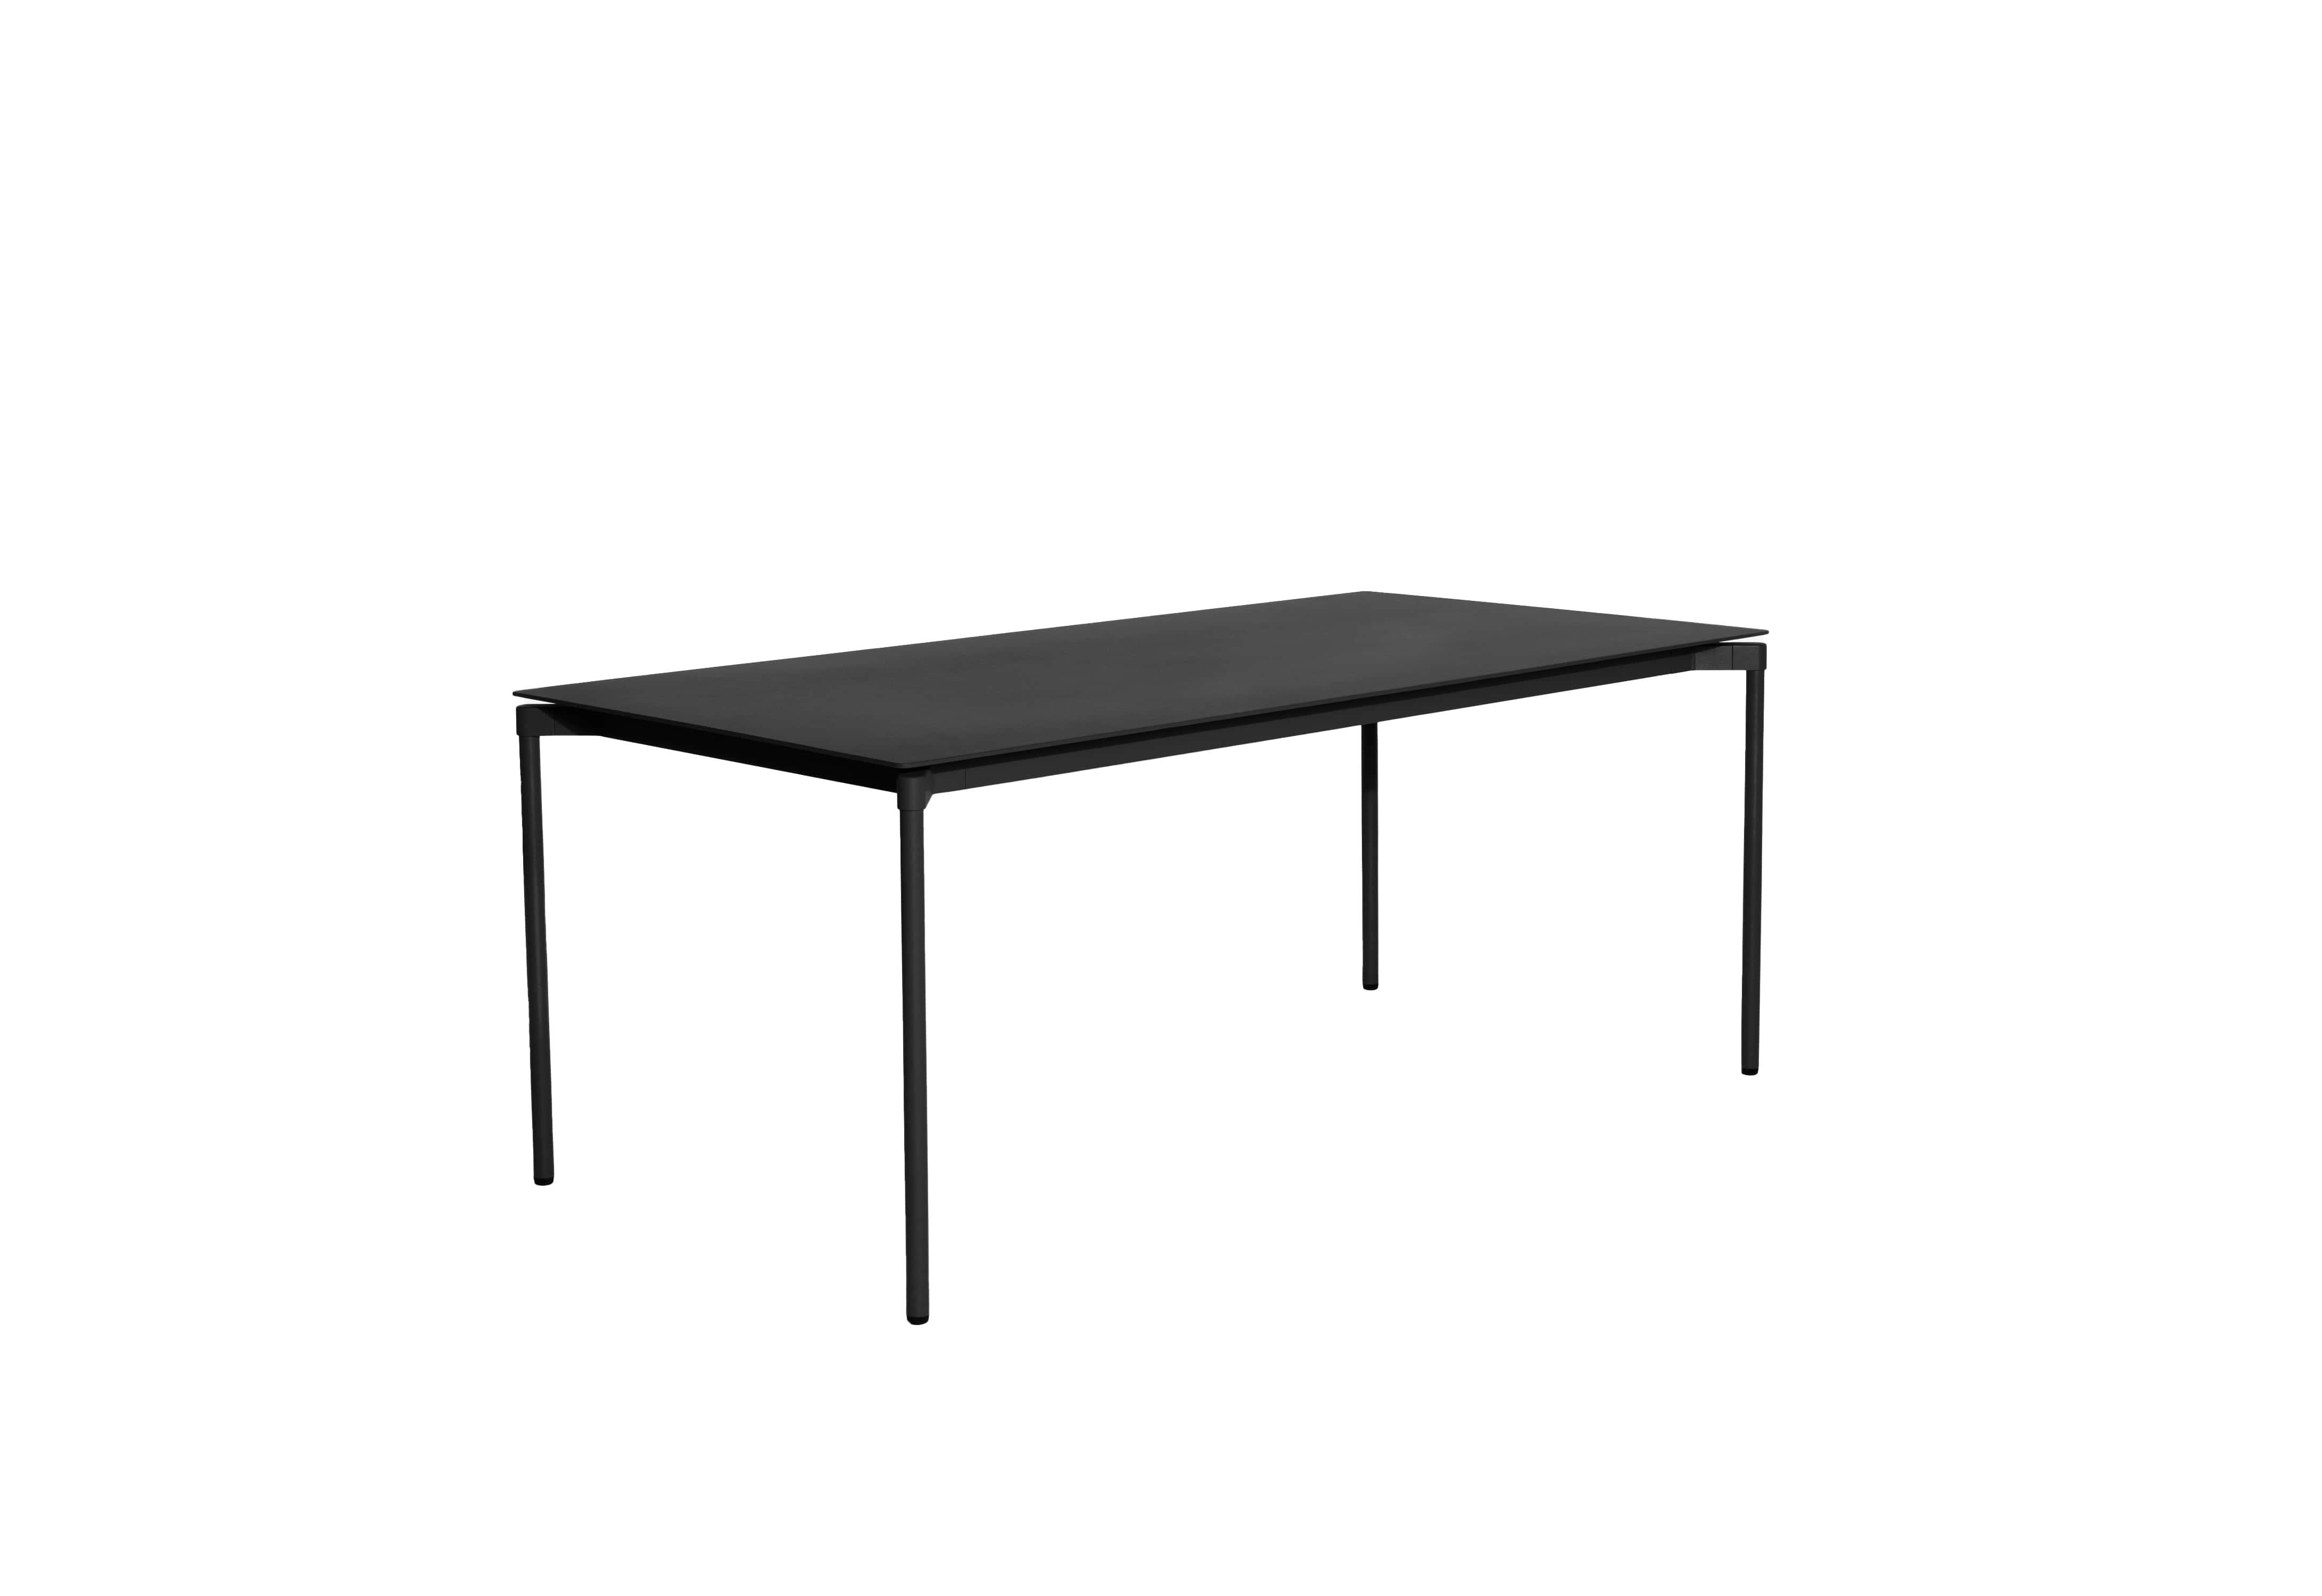 Petite Friture Fromme Rectangular Table in Black Aluminium by Tom Chung, 2020

The Fromme collection stands out by its pure line and compact design. Absorbers placed under the seating gives a soft and very comfortable flexibility to seats. Made